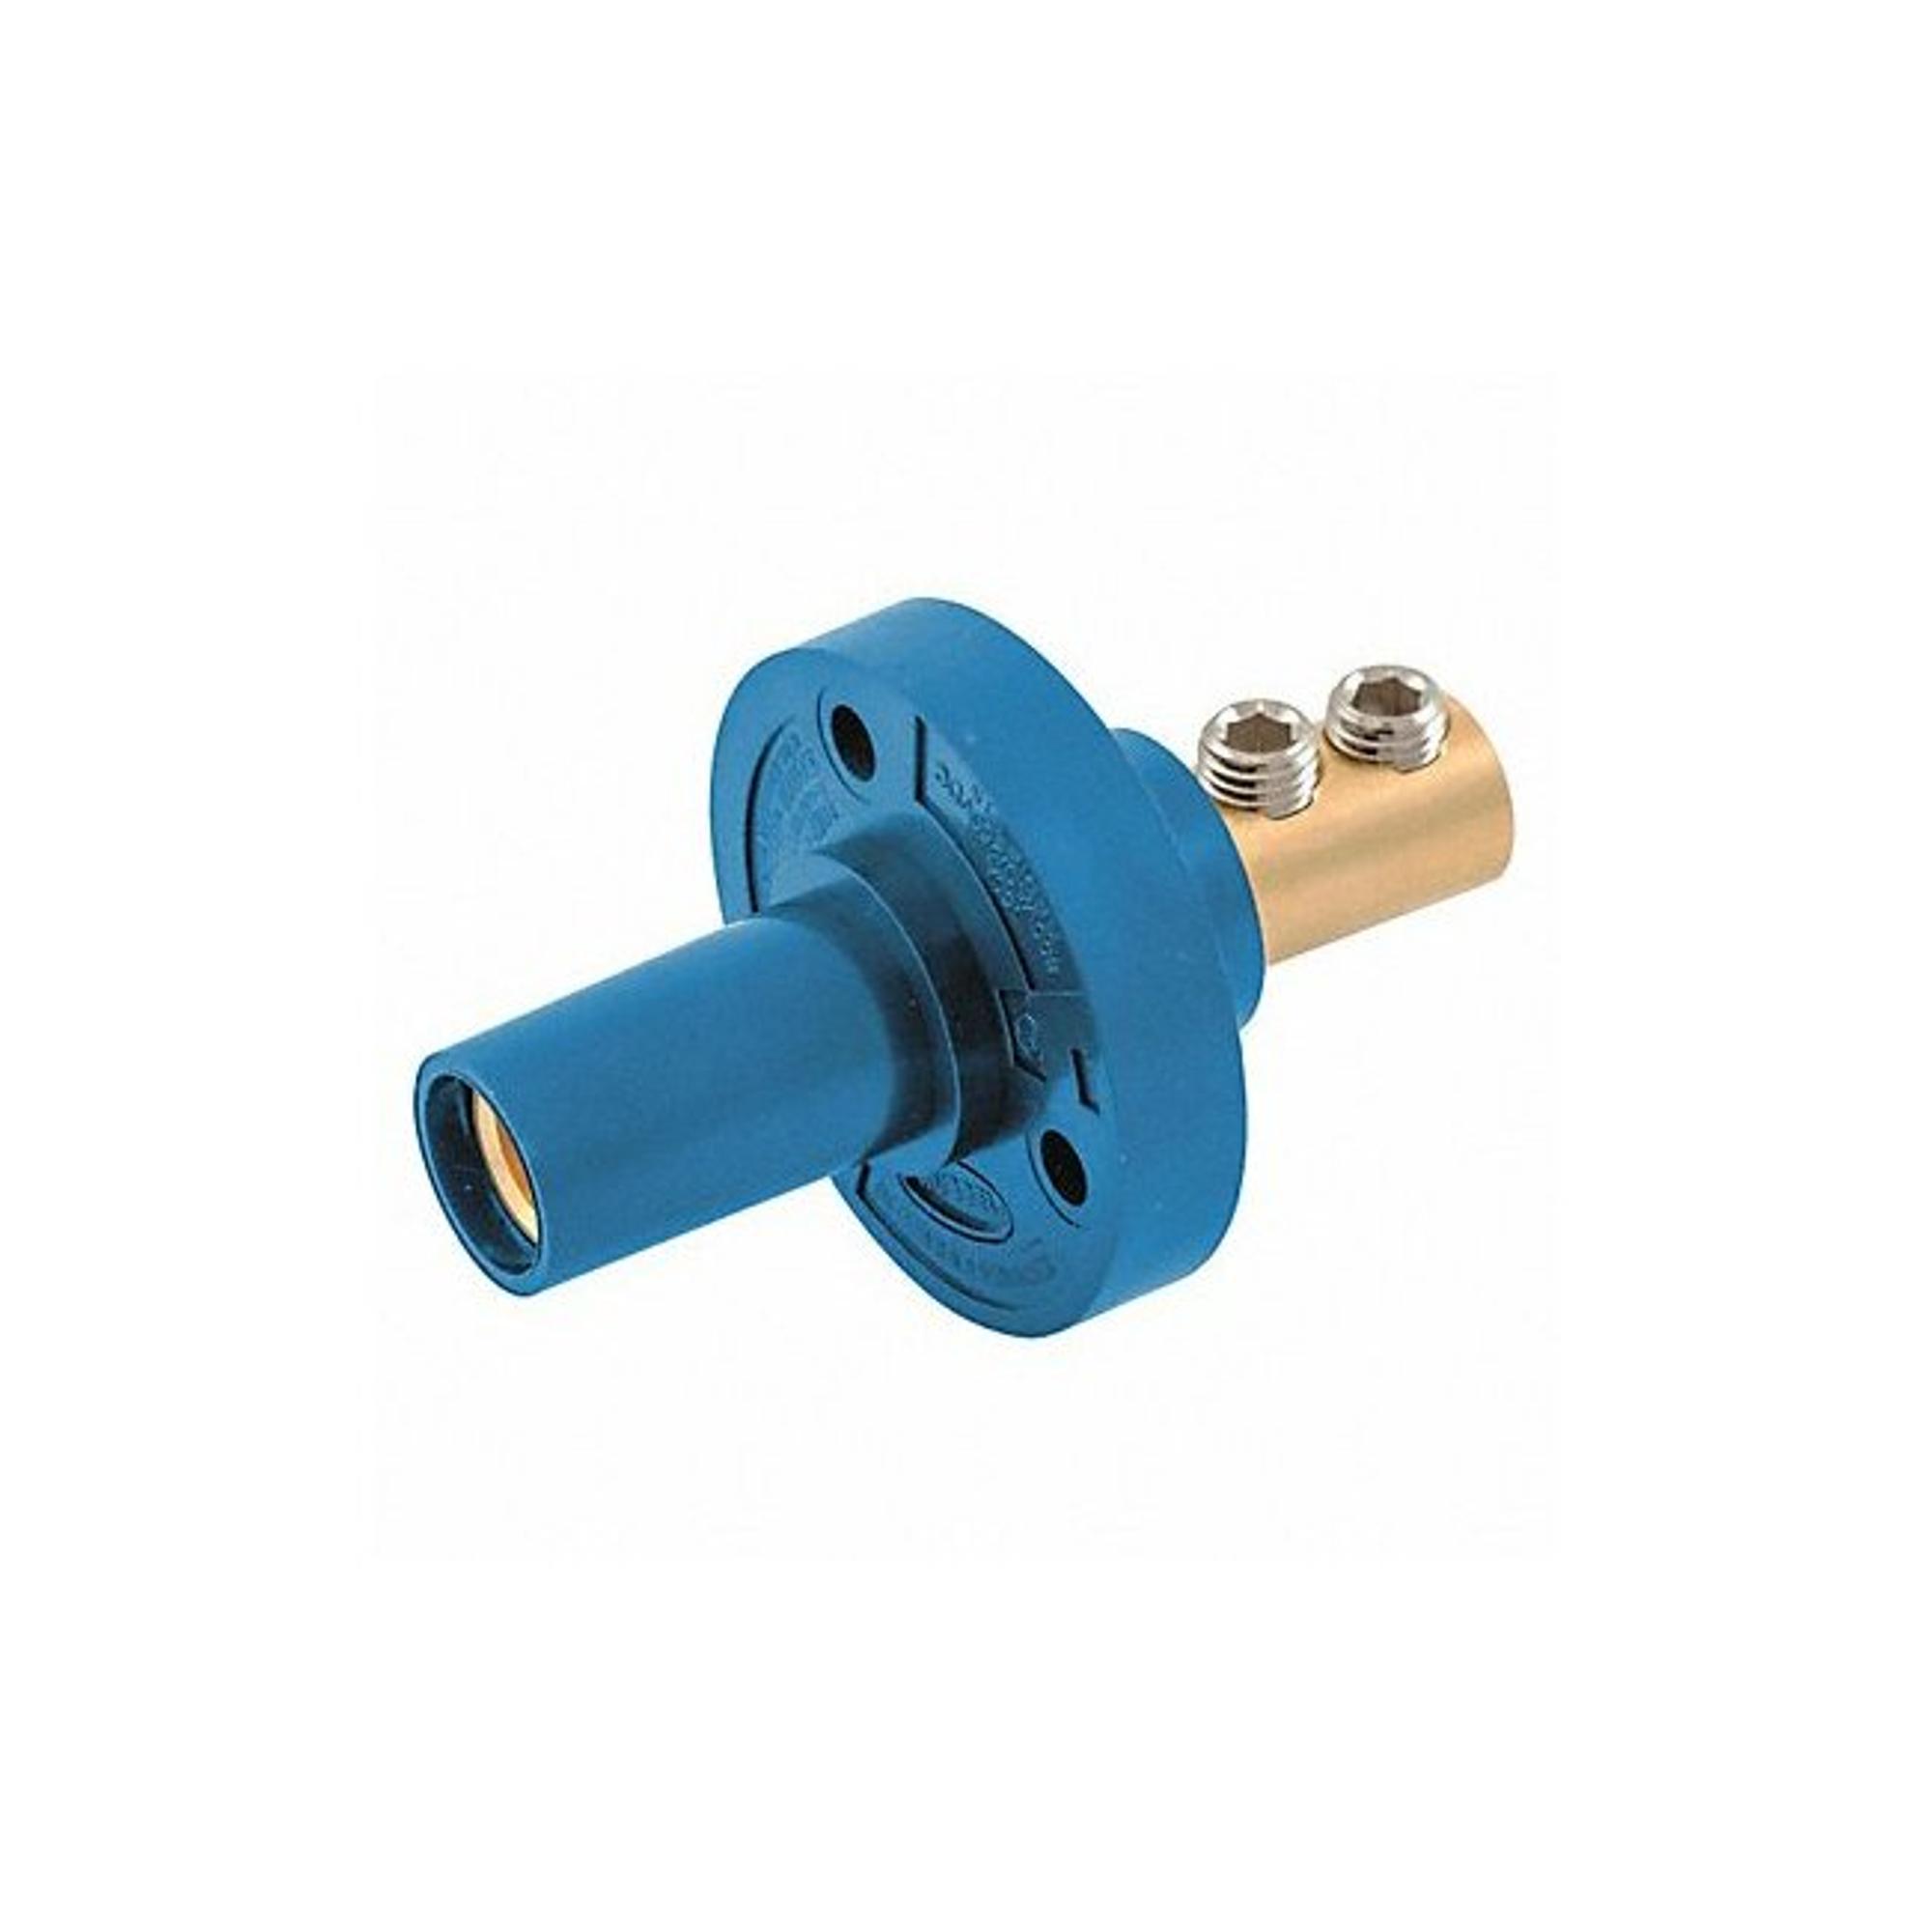 HUBBELL HBL15FRBL Receptacle,Blue,Female,Taper Nose,Double - image 1 of 1